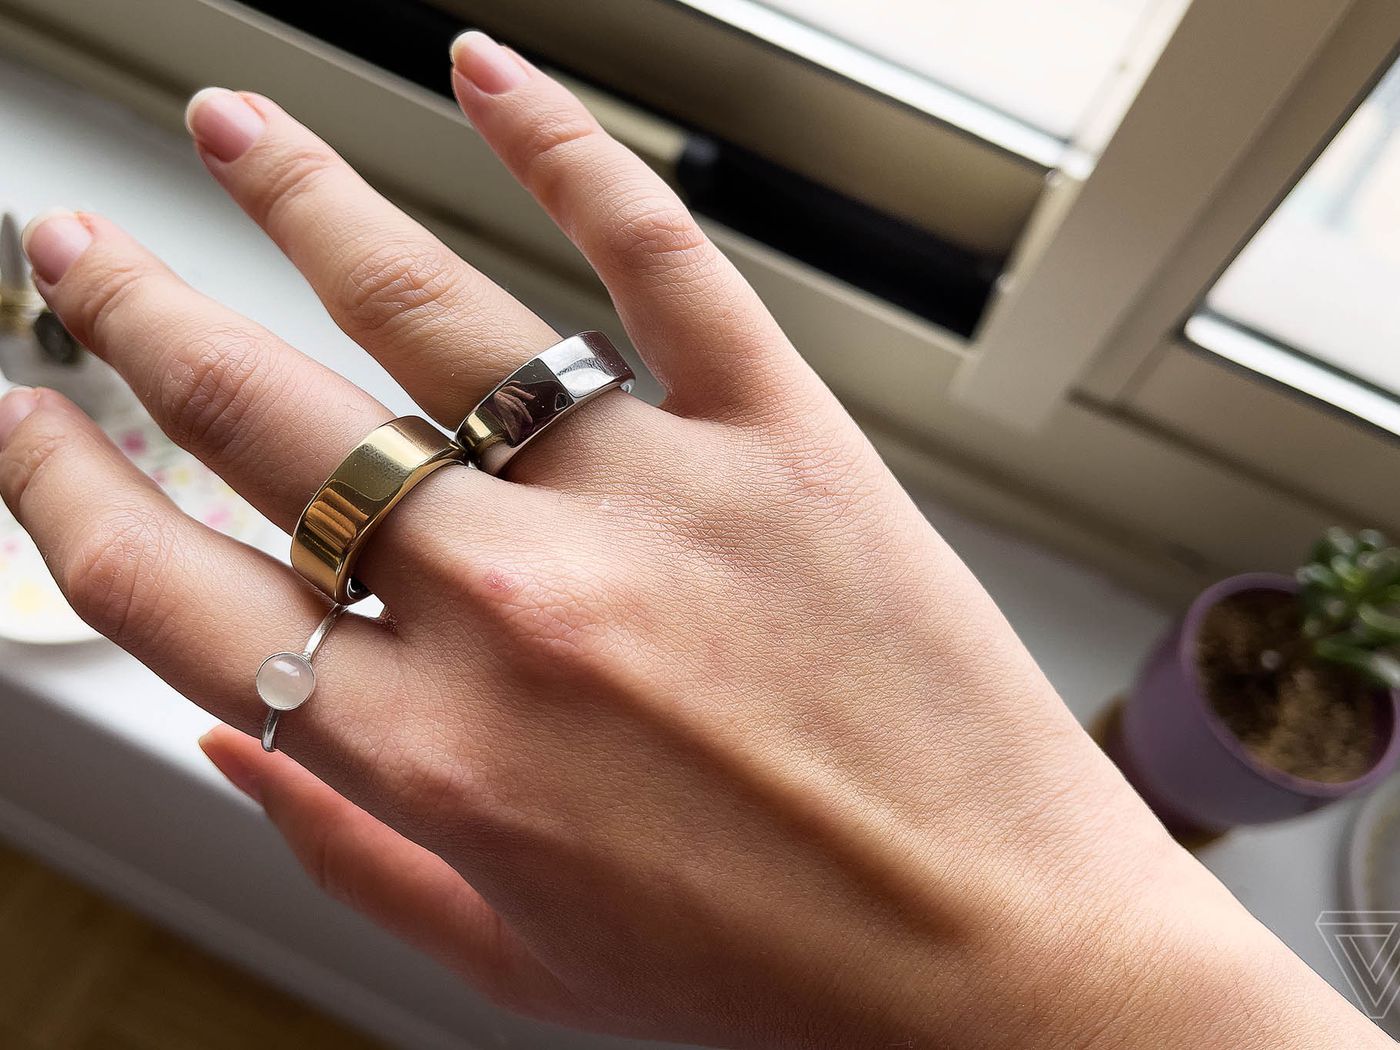 regen Zonder shuttle Smart rings have a long way to go - The Verge